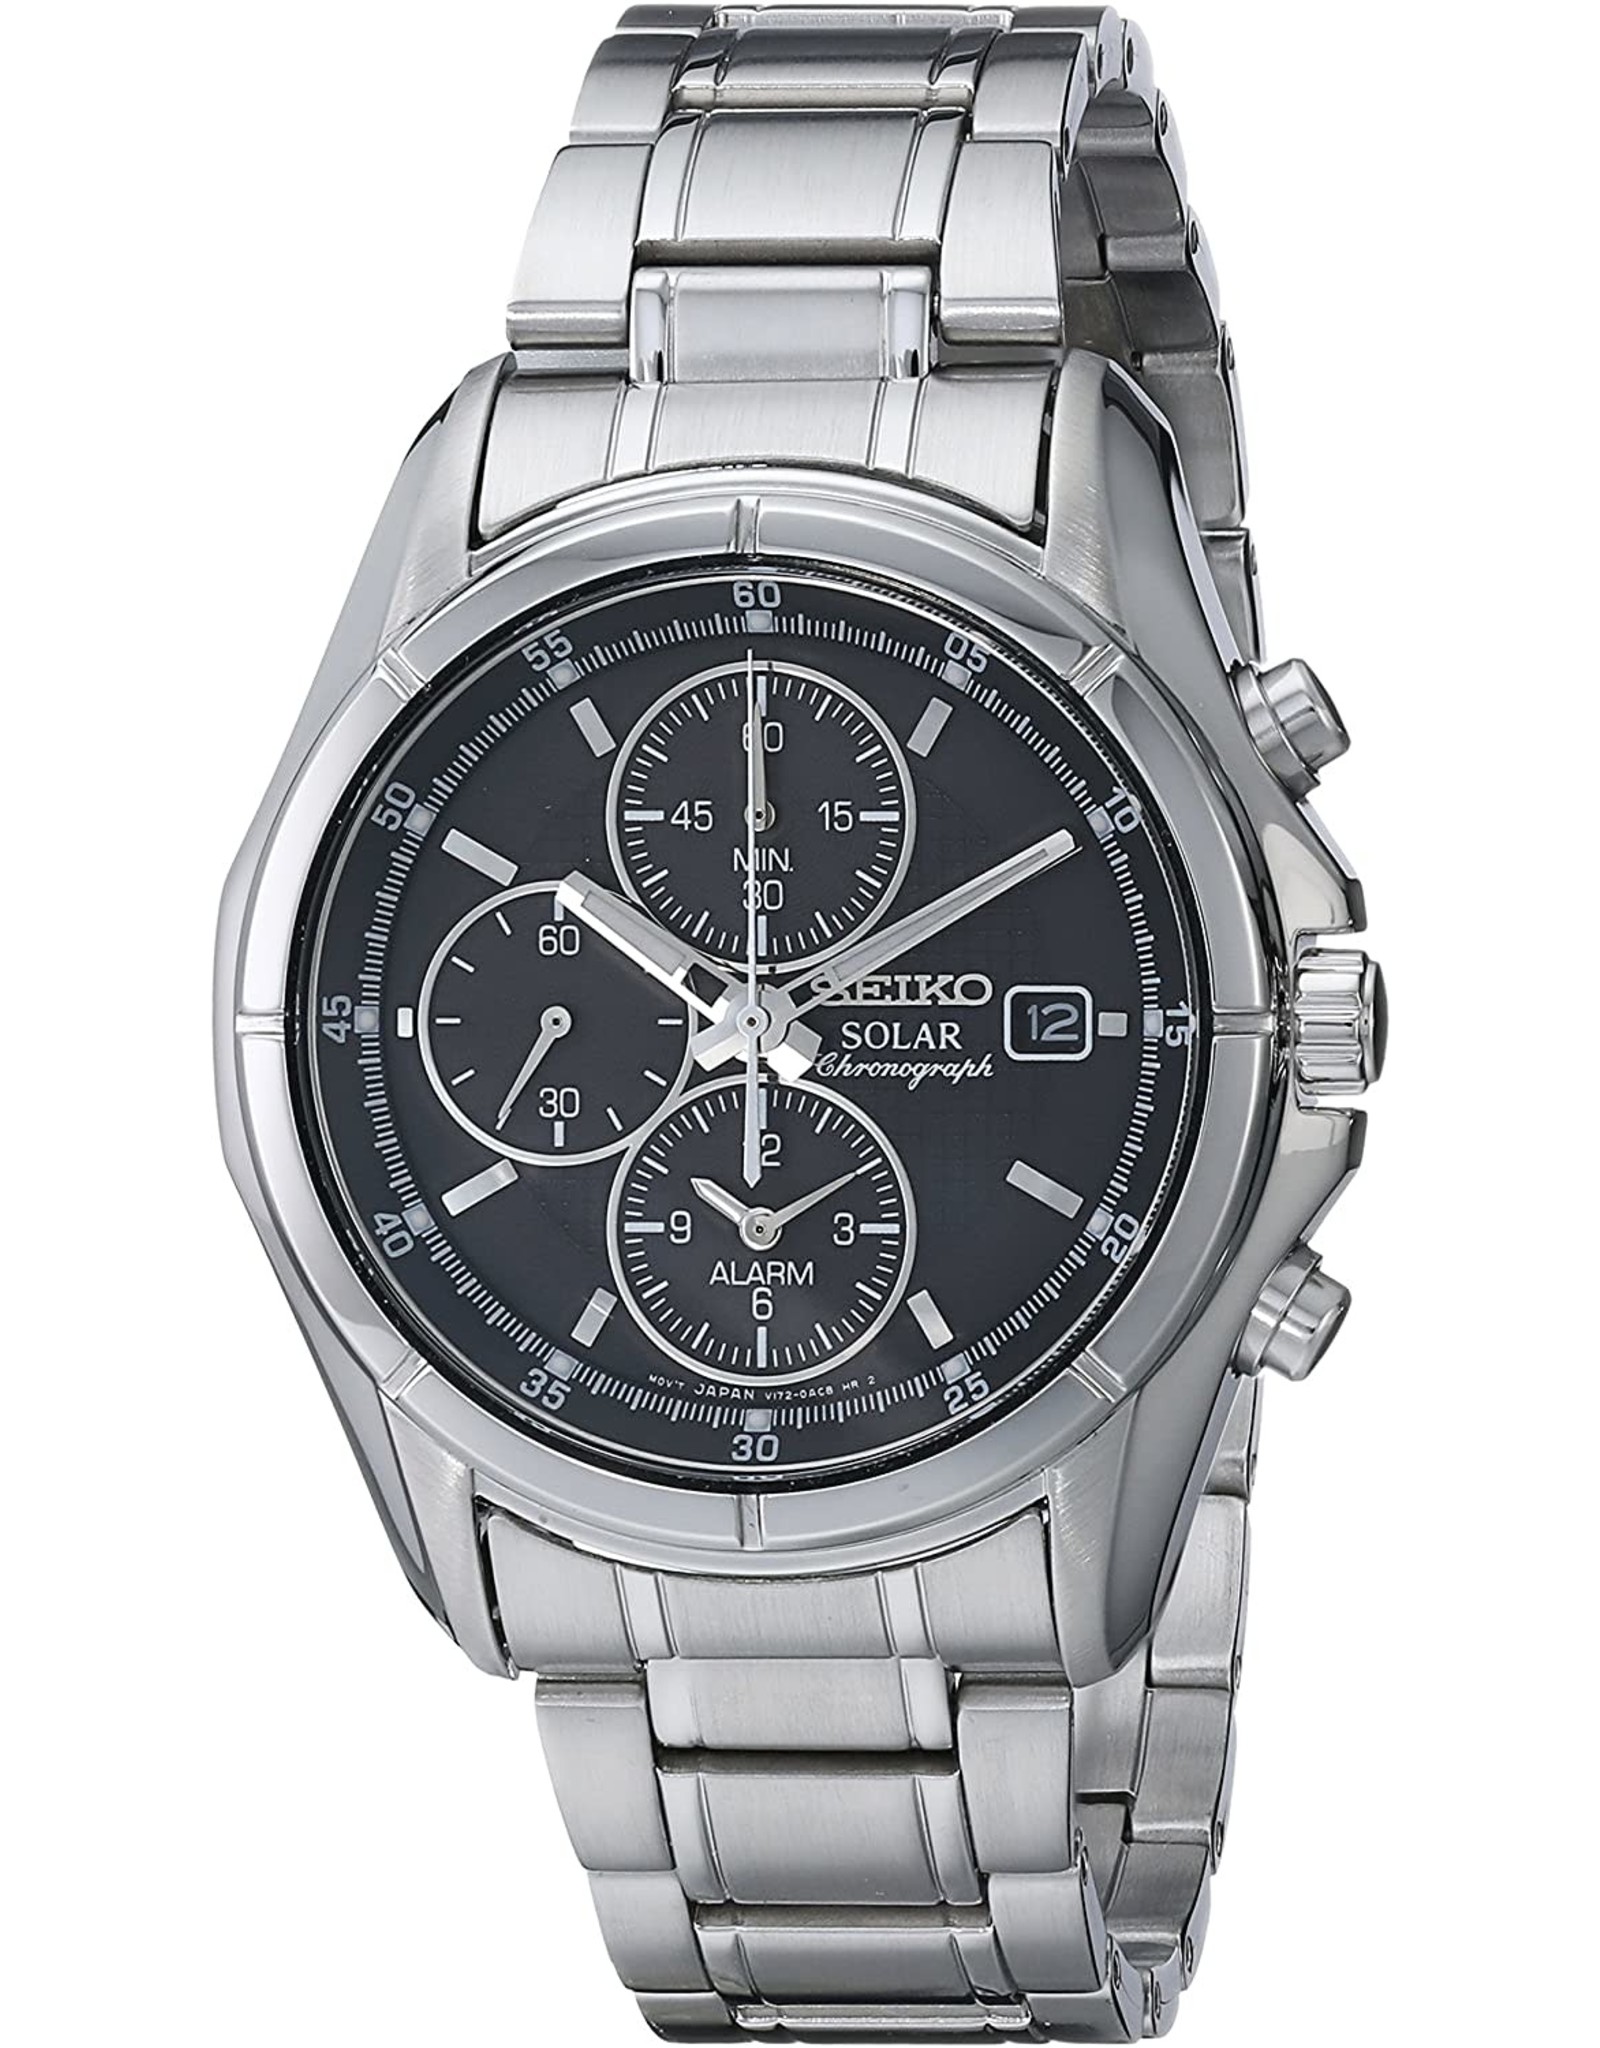 Mens Seiko Solar Chronograph Watch with Stainless Steel Band, 39mm Jewelers Miami Lakes